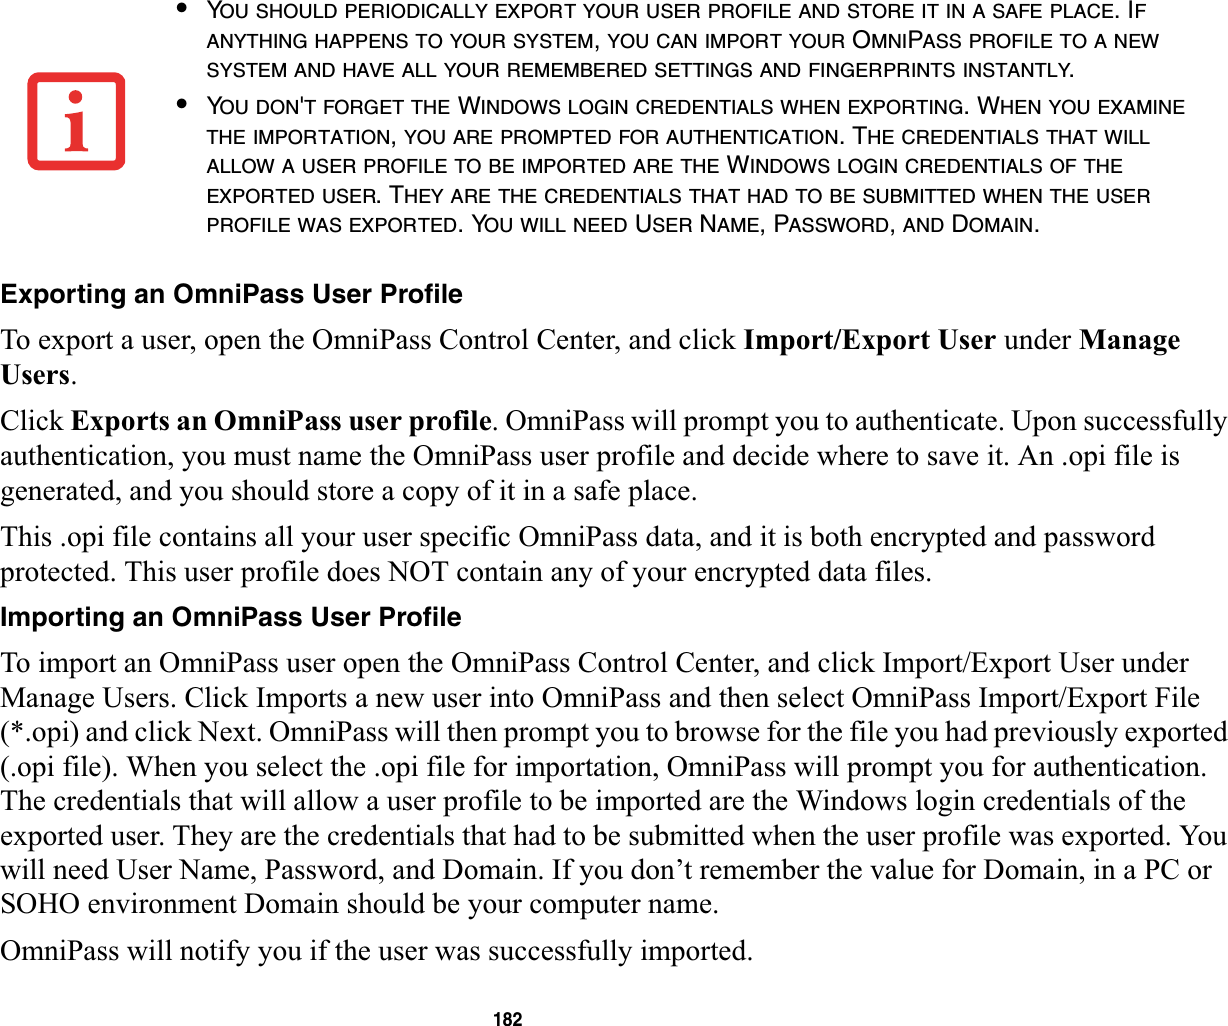 182Exporting an OmniPass User ProfileTo export a user, open the OmniPass Control Center, and click Import/Export User under Manage Users.Click Exports an OmniPass user profile. OmniPass will prompt you to authenticate. Upon successfully authentication, you must name the OmniPass user profile and decide where to save it. An .opi file is generated, and you should store a copy of it in a safe place.This .opi file contains all your user specific OmniPass data, and it is both encrypted and password protected. This user profile does NOT contain any of your encrypted data files.Importing an OmniPass User ProfileTo import an OmniPass user open the OmniPass Control Center, and click Import/Export User under Manage Users. Click Imports a new user into OmniPass and then select OmniPass Import/Export File (*.opi) and click Next. OmniPass will then prompt you to browse for the file you had previously exported (.opi file). When you select the .opi file for importation, OmniPass will prompt you for authentication. The credentials that will allow a user profile to be imported are the Windows login credentials of the exported user. They are the credentials that had to be submitted when the user profile was exported. You will need User Name, Password, and Domain. If you don’t remember the value for Domain, in a PC or SOHO environment Domain should be your computer name.OmniPass will notify you if the user was successfully imported.•YOU SHOULD PERIODICALLY EXPORT YOUR USER PROFILE AND STORE IT IN A SAFE PLACE. IFANYTHING HAPPENS TO YOUR SYSTEM,YOU CAN IMPORT YOUR OMNIPASS PROFILE TO A NEWSYSTEM AND HAVE ALL YOUR REMEMBERED SETTINGS AND FINGERPRINTS INSTANTLY.•YOU DON&apos;T FORGET THE WINDOWS LOGIN CREDENTIALS WHEN EXPORTING. WHEN YOU EXAMINETHE IMPORTATION,YOU ARE PROMPTED FOR AUTHENTICATION. THE CREDENTIALS THAT WILLALLOW A USER PROFILE TO BE IMPORTED ARE THE WINDOWS LOGIN CREDENTIALS OF THEEXPORTED USER. THEY ARE THE CREDENTIALS THAT HAD TO BE SUBMITTED WHEN THE USERPROFILE WAS EXPORTED. YOU WILL NEED USER NAME, PASSWORD,AND DOMAIN.